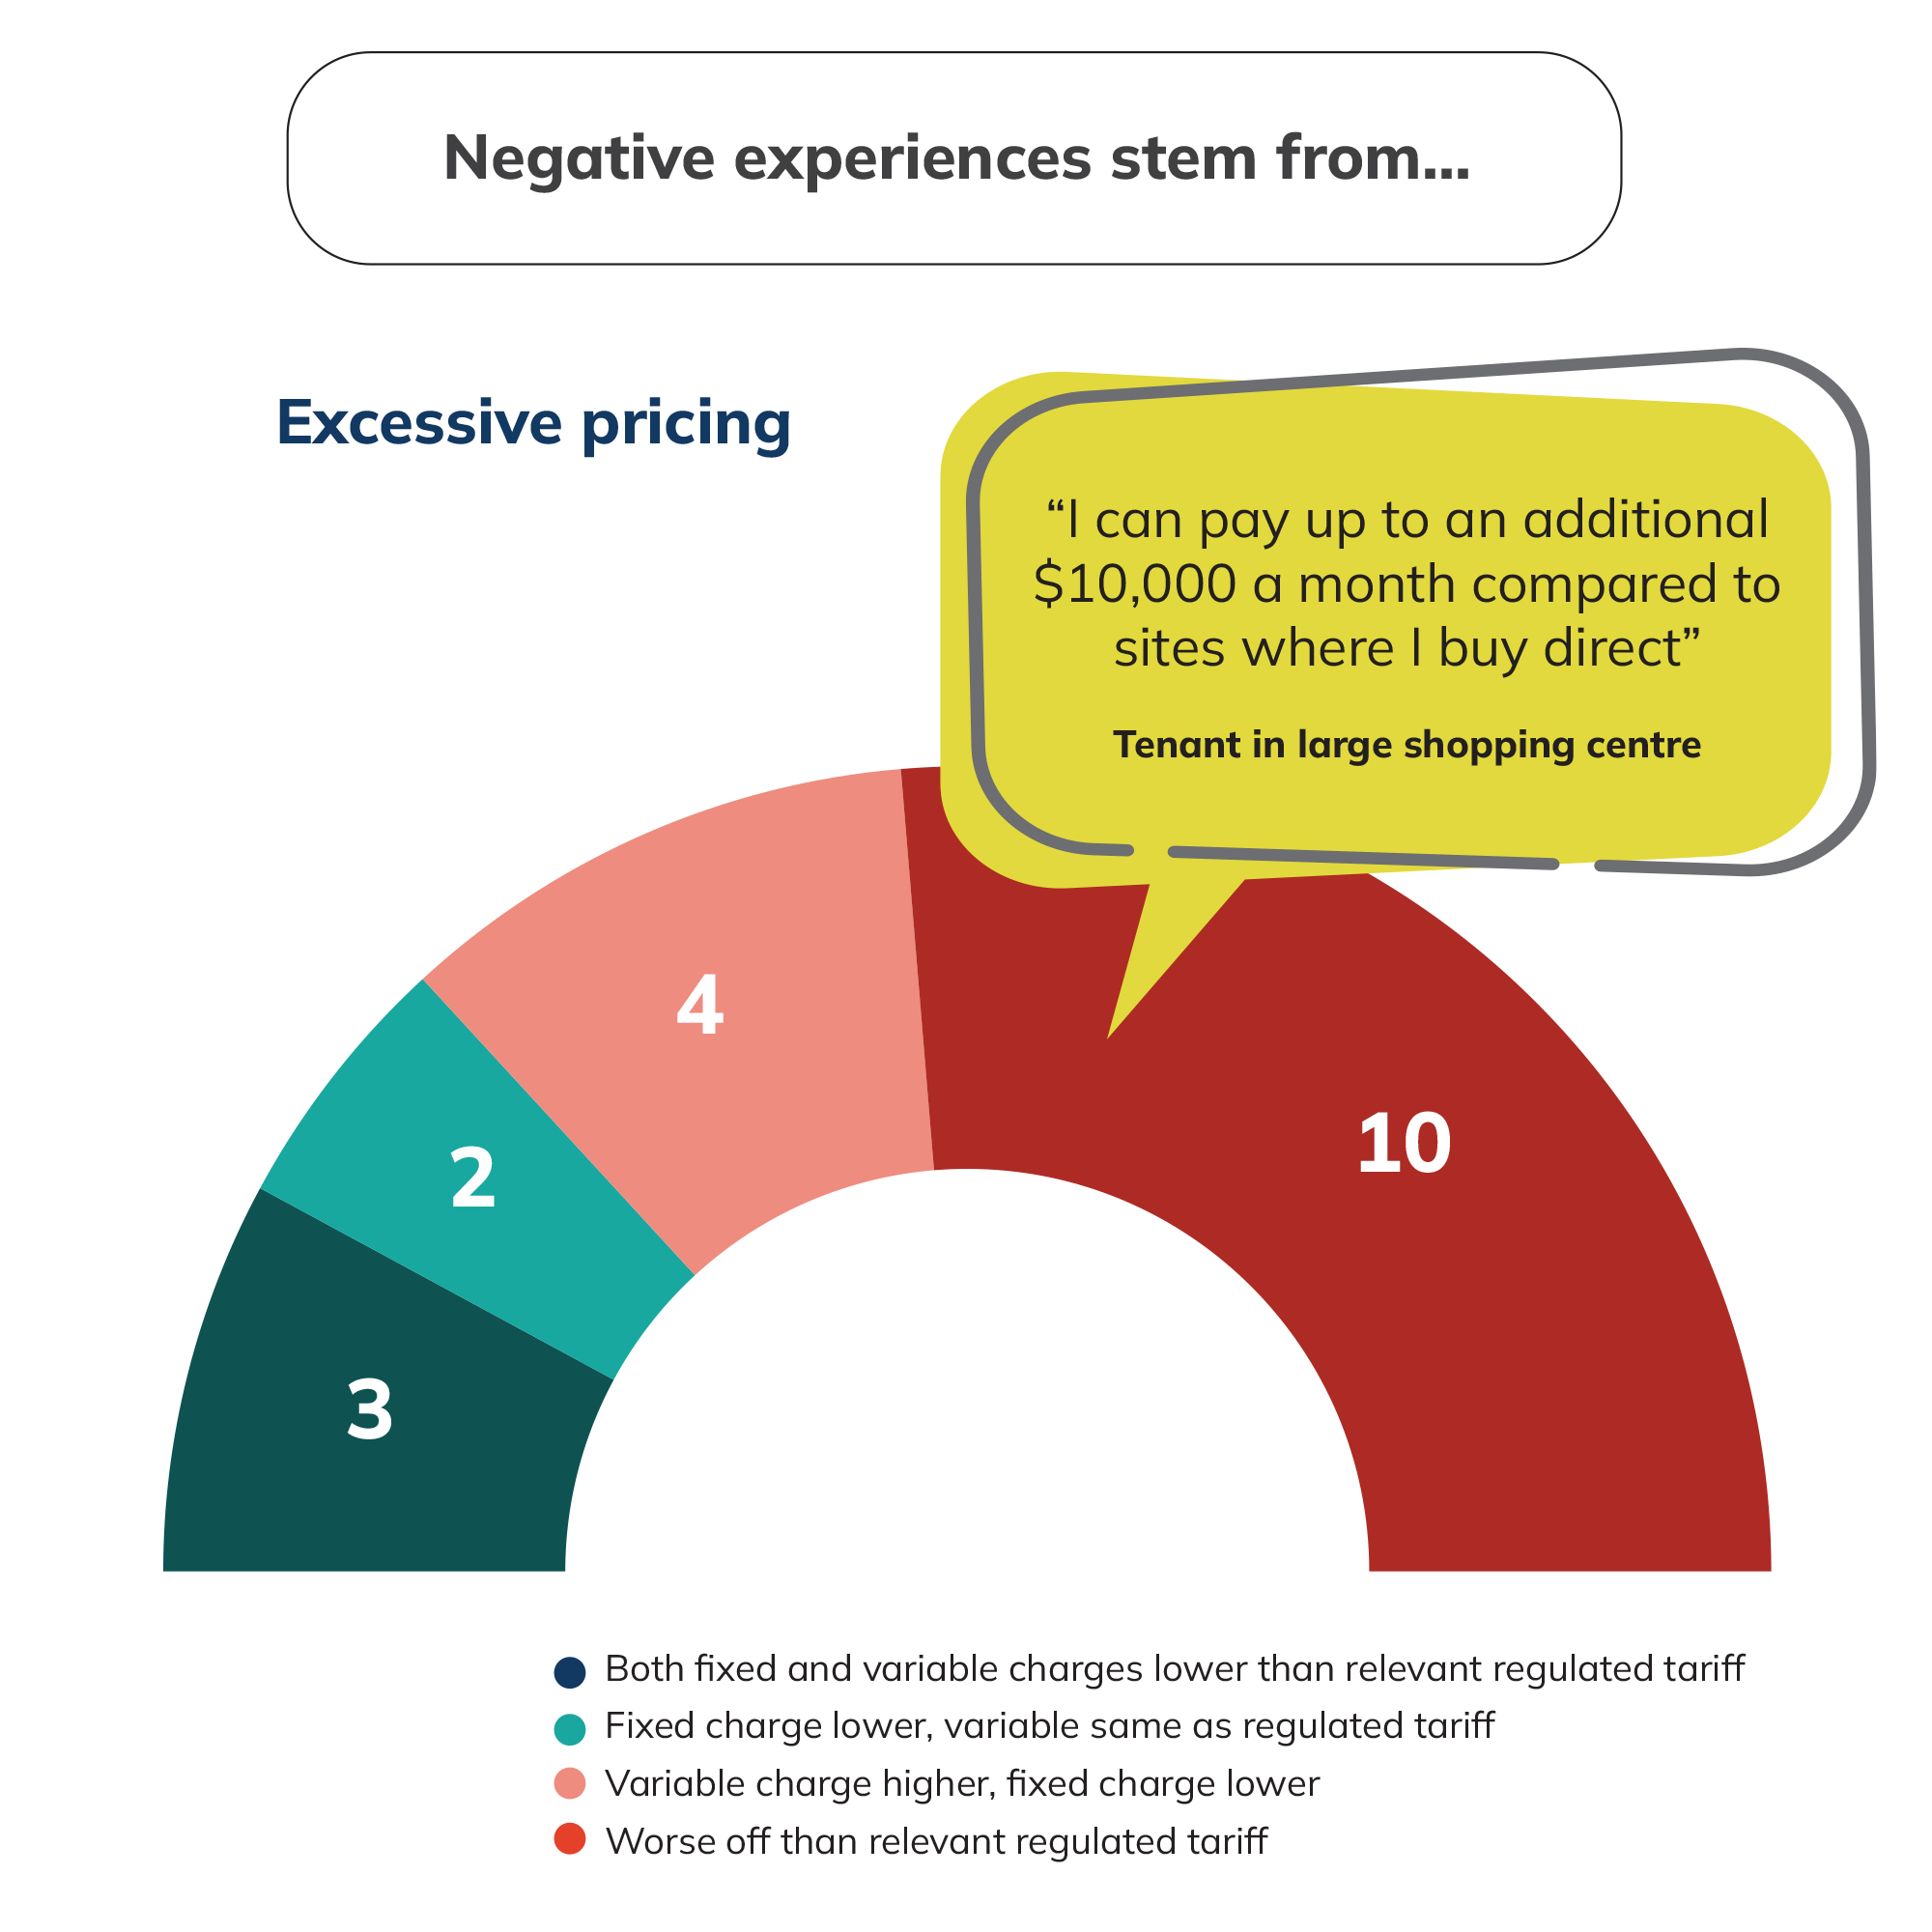 Negative experiences stem from excessive pricing